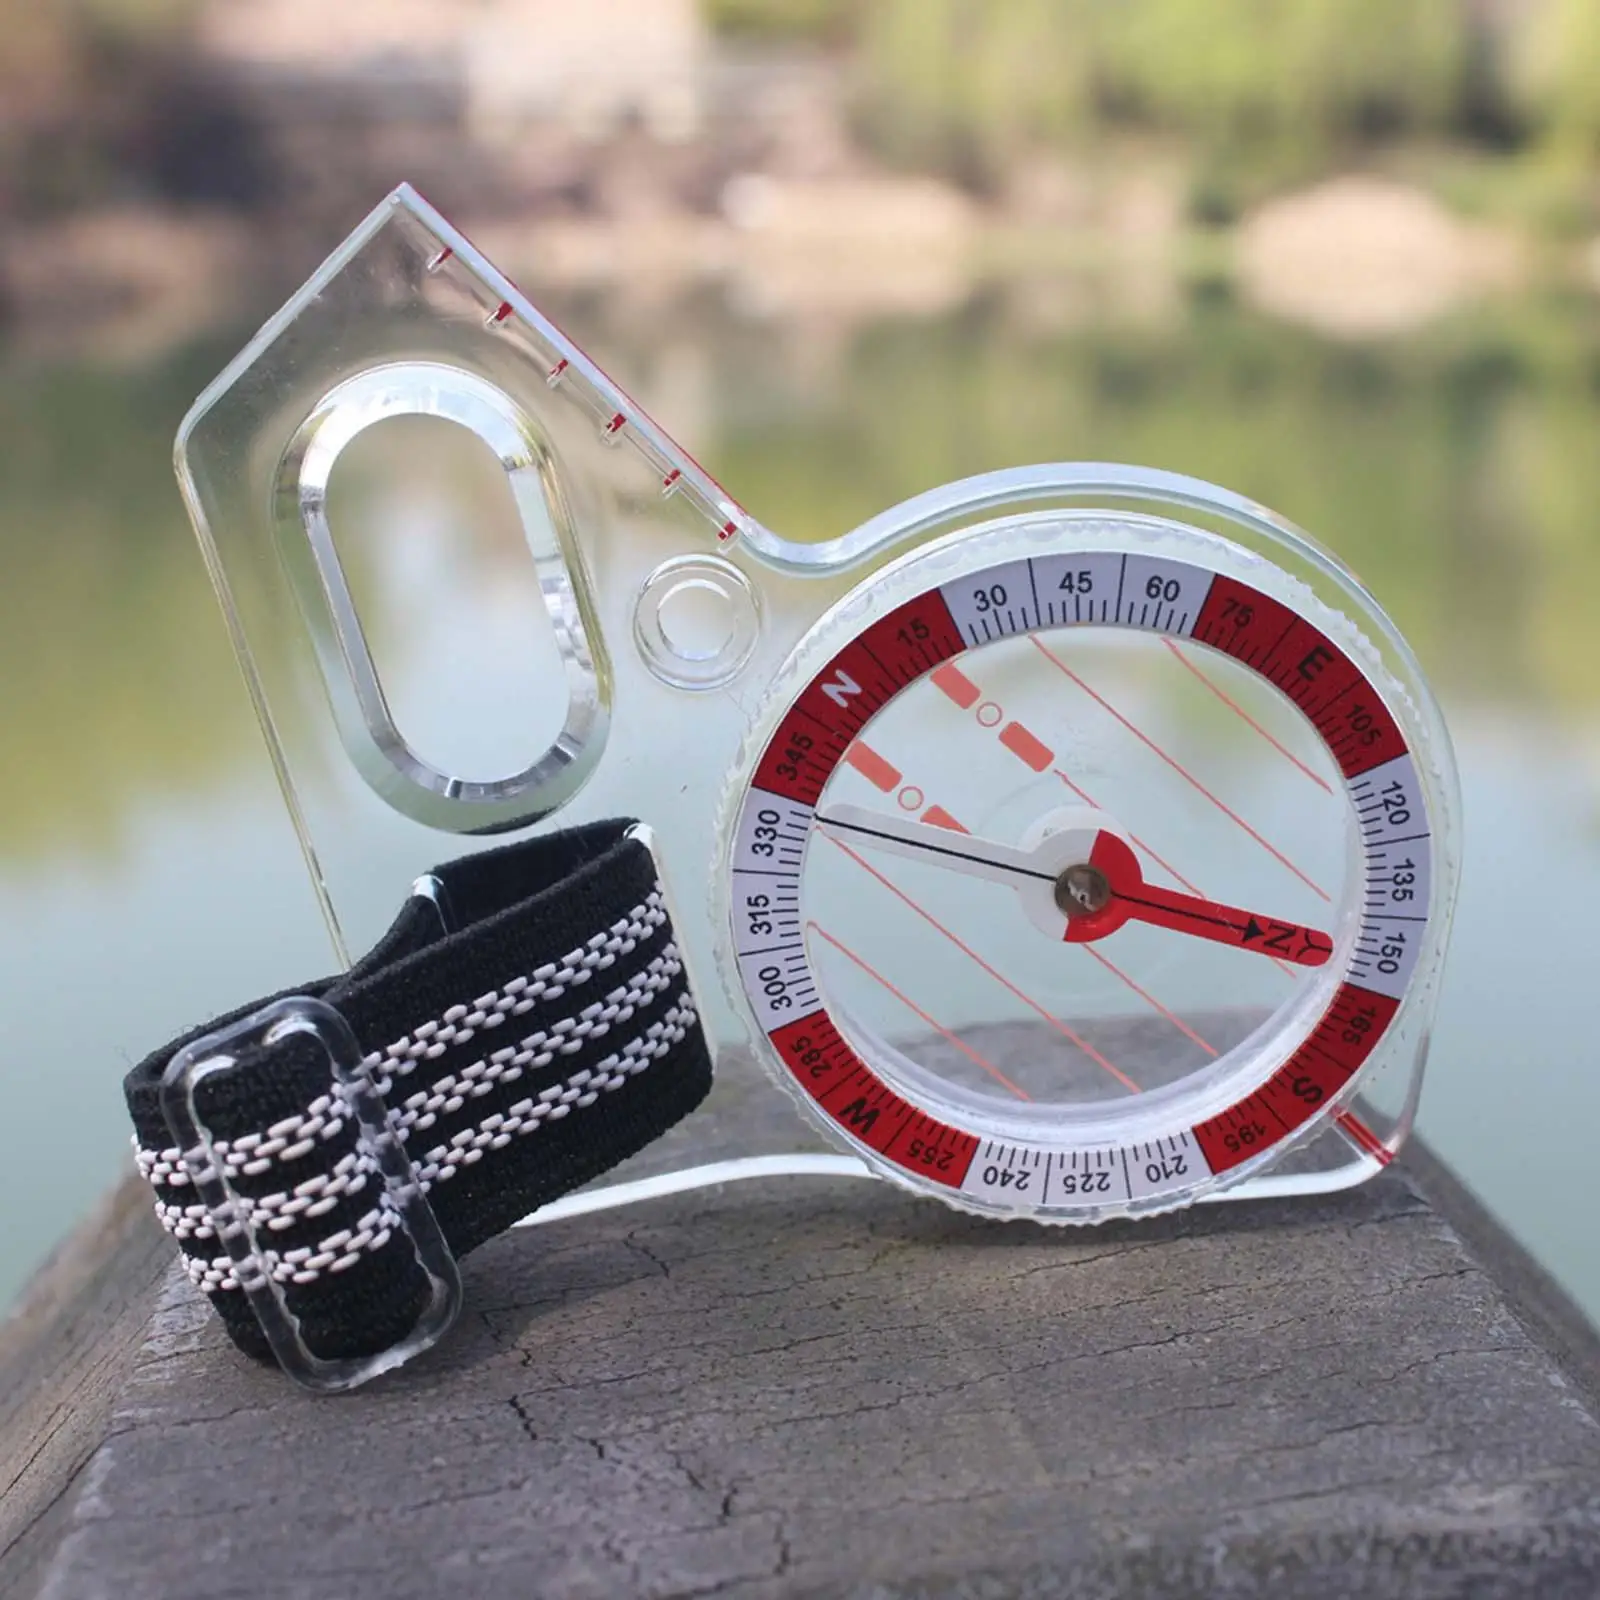 Thumb Athletics Aim Advanced Movement Scale for Reading Boating